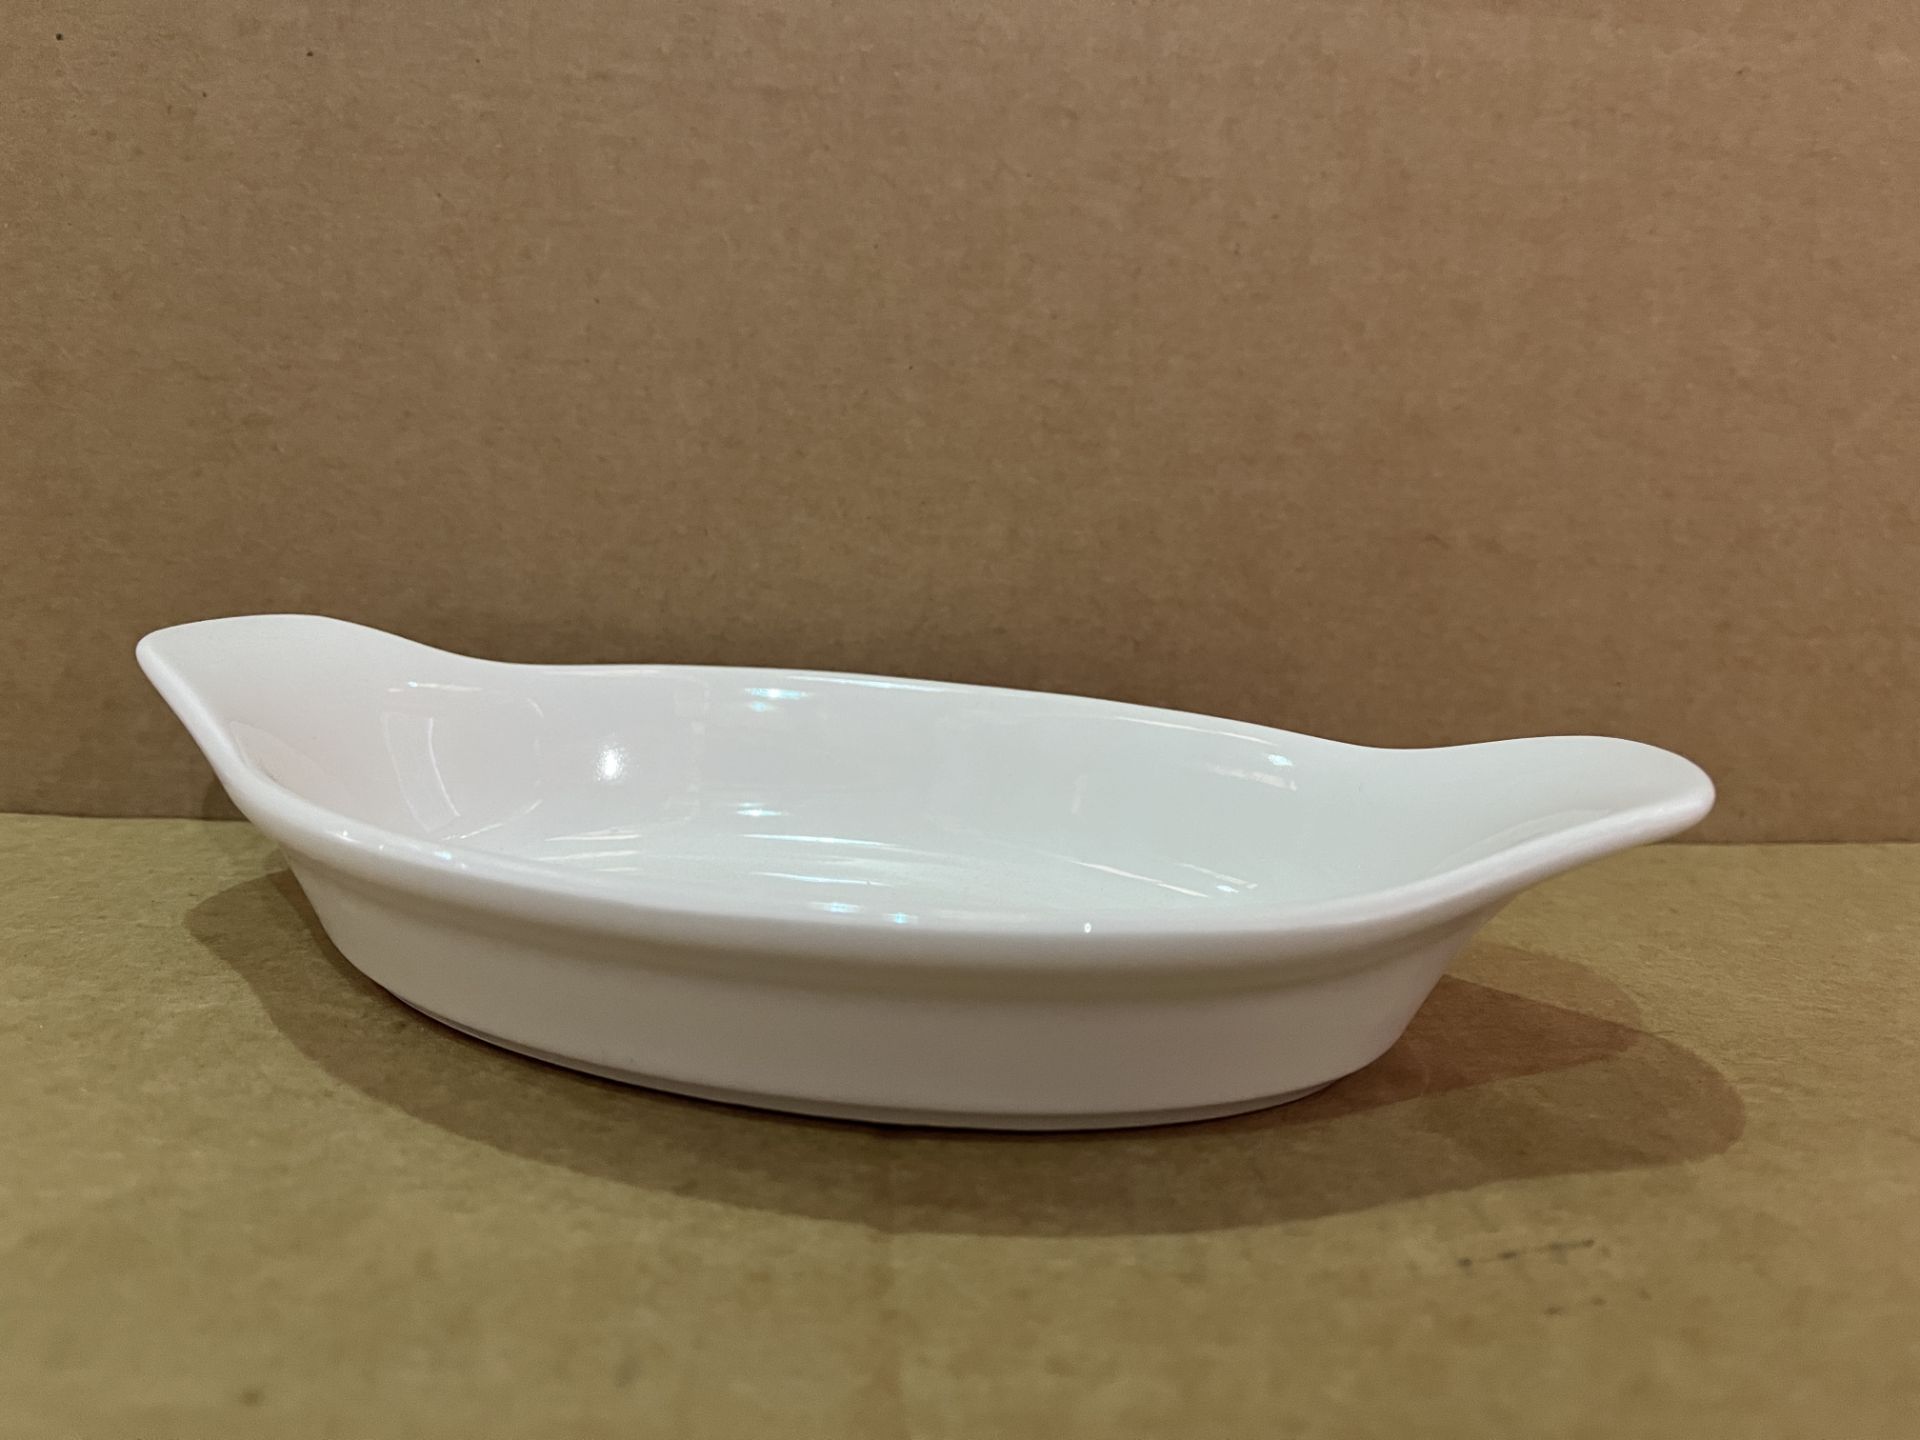 9 X BRAND NEW PACKS OF 6 CHURCHILL COOKWARE WHITE OVAL EARED DISHES 11.3 X 20.5CM RRP £55 PER PACK